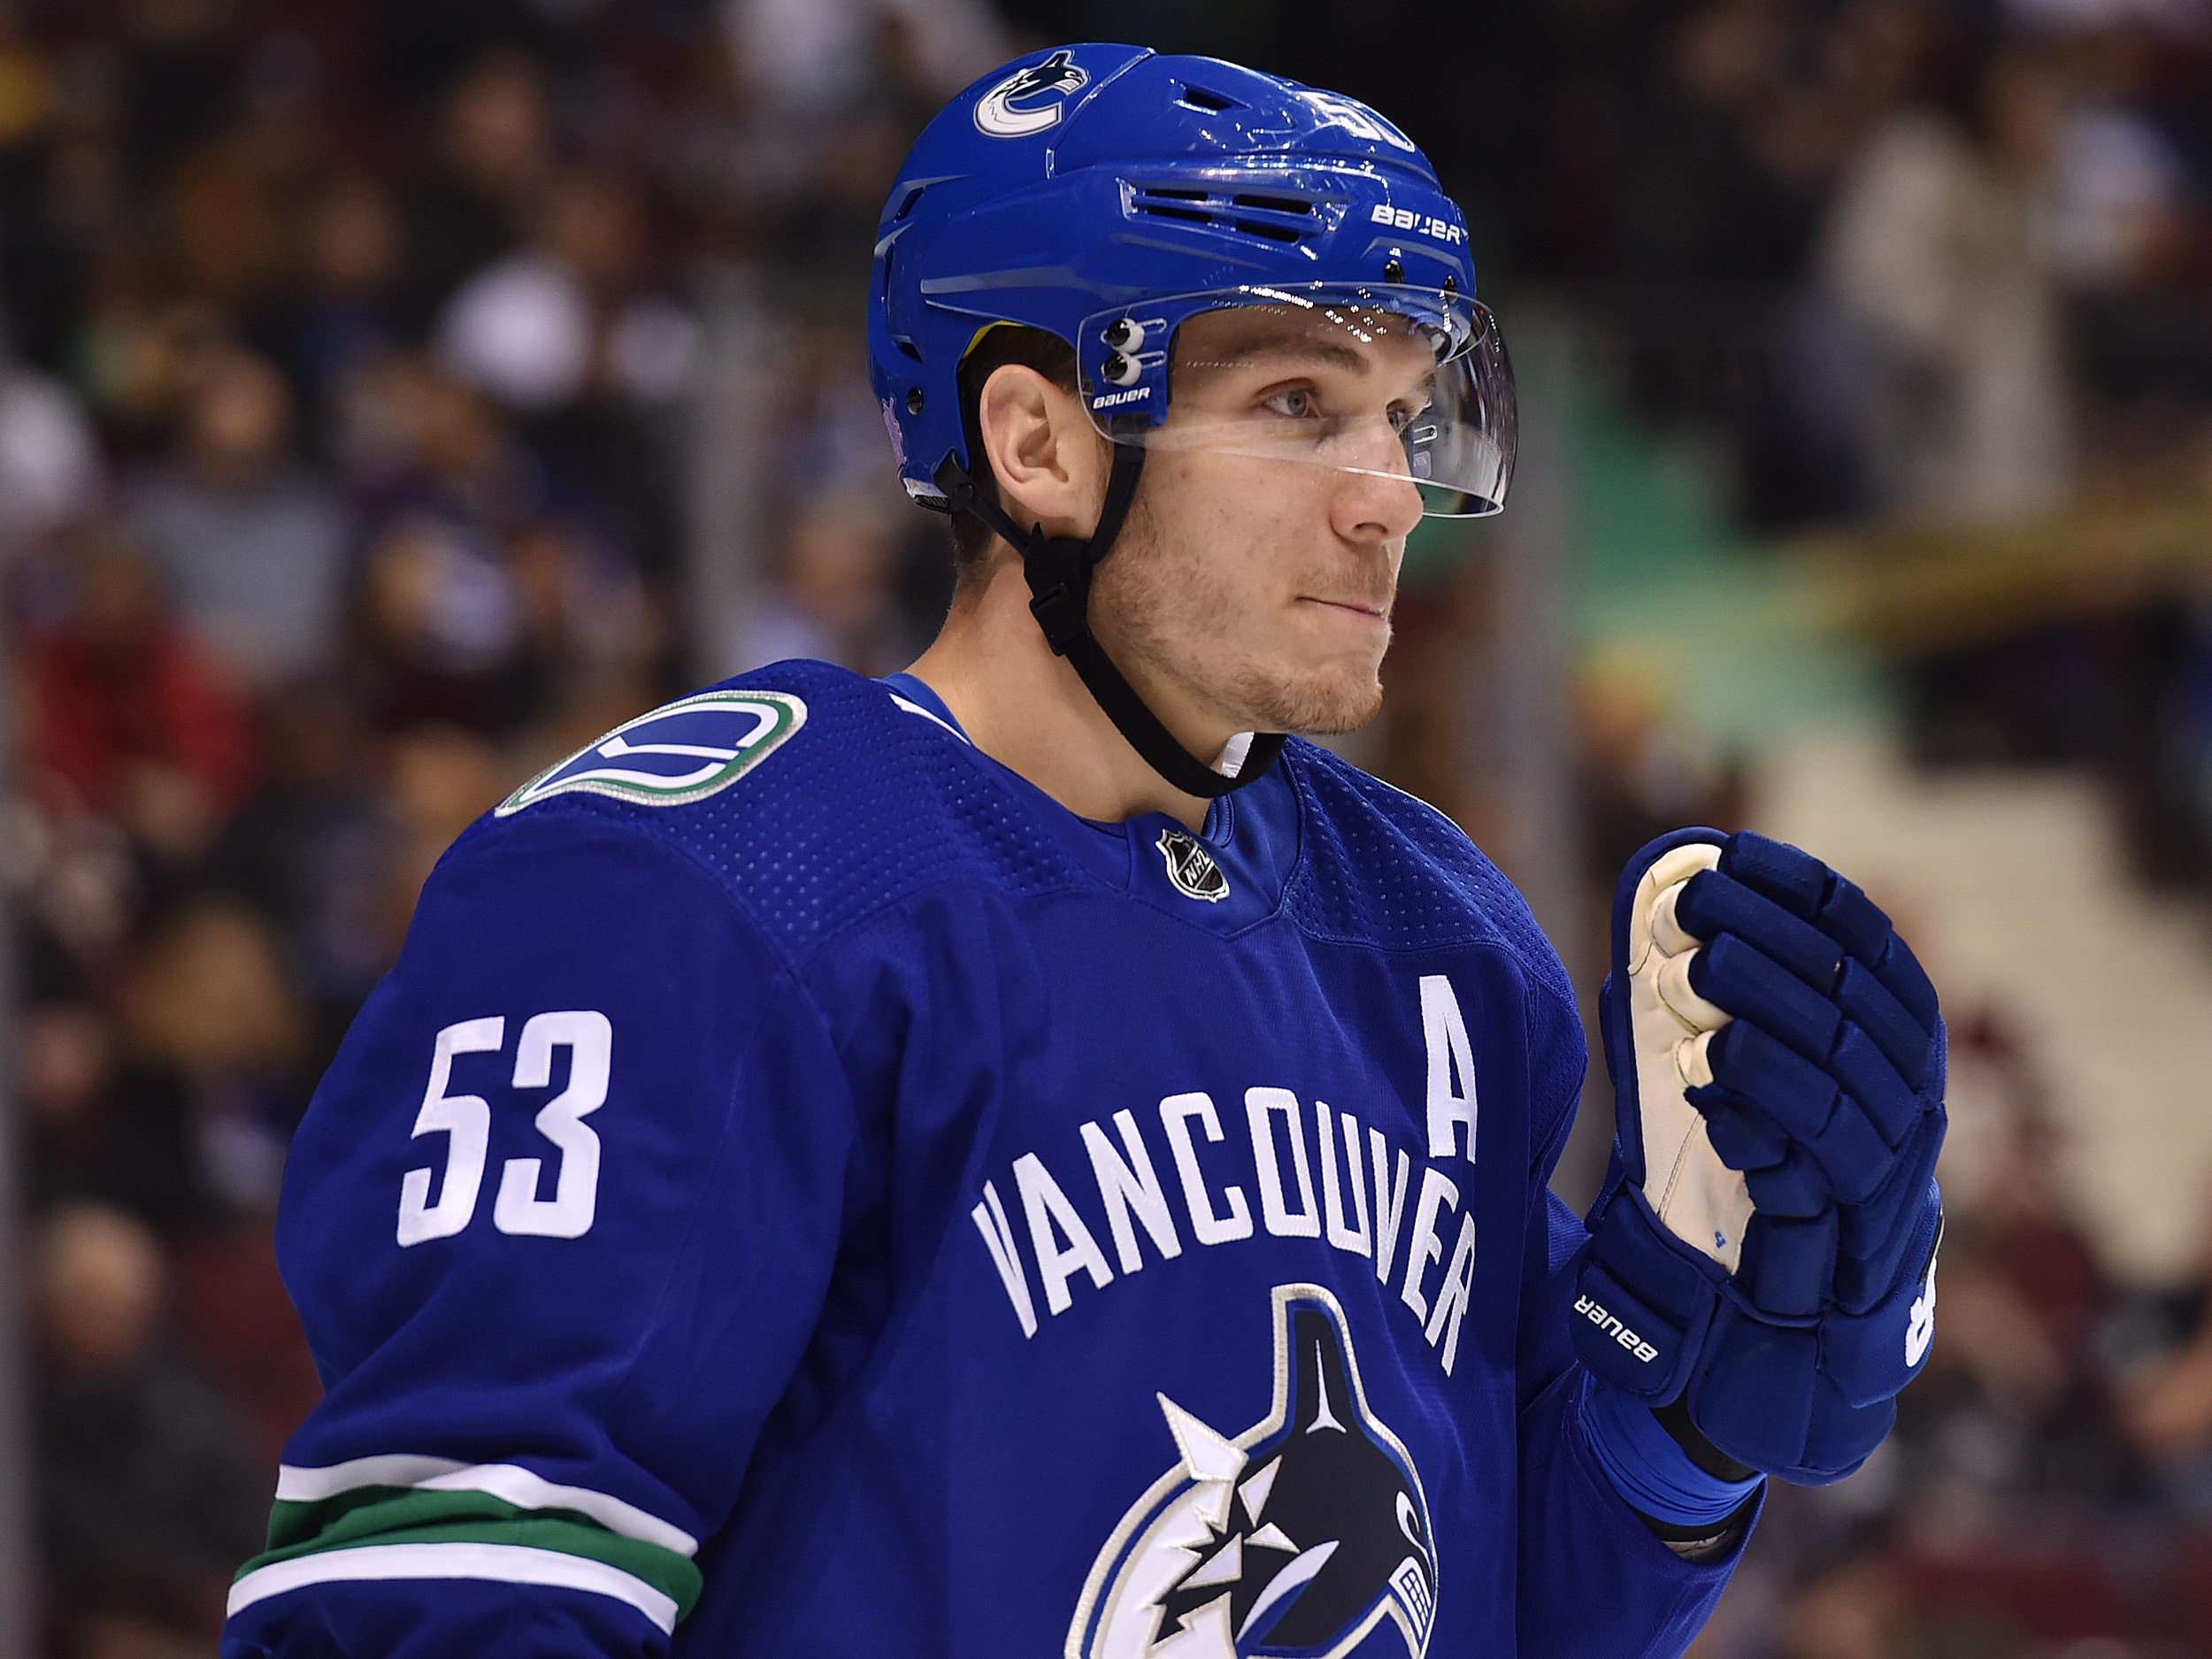 Bo Horvat Of The Vancouver Canucks Says The NHL Suspension Is